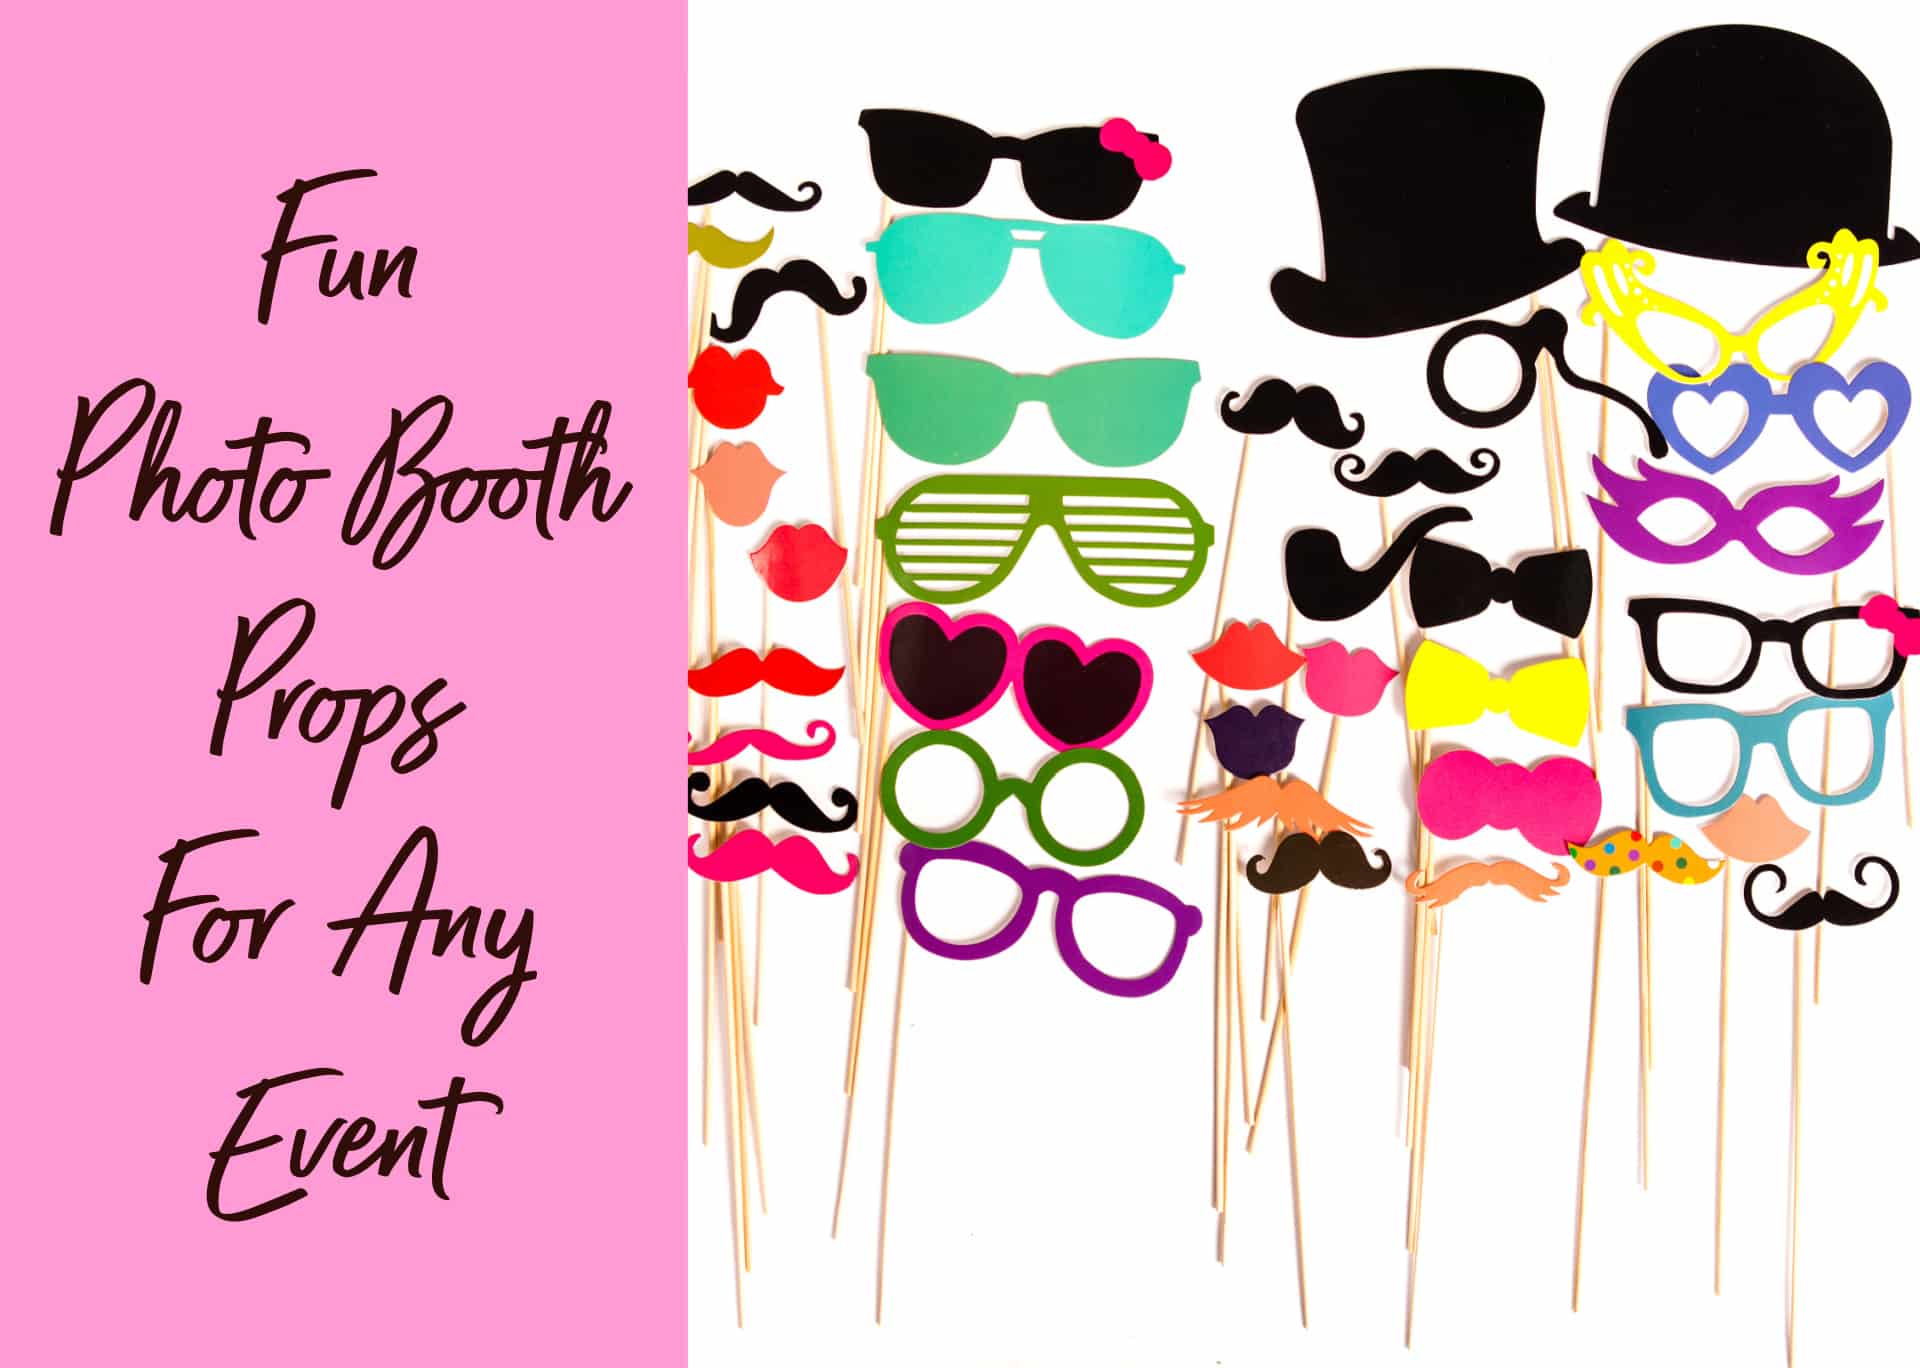 Fun Photo Booth Props For Any Event!